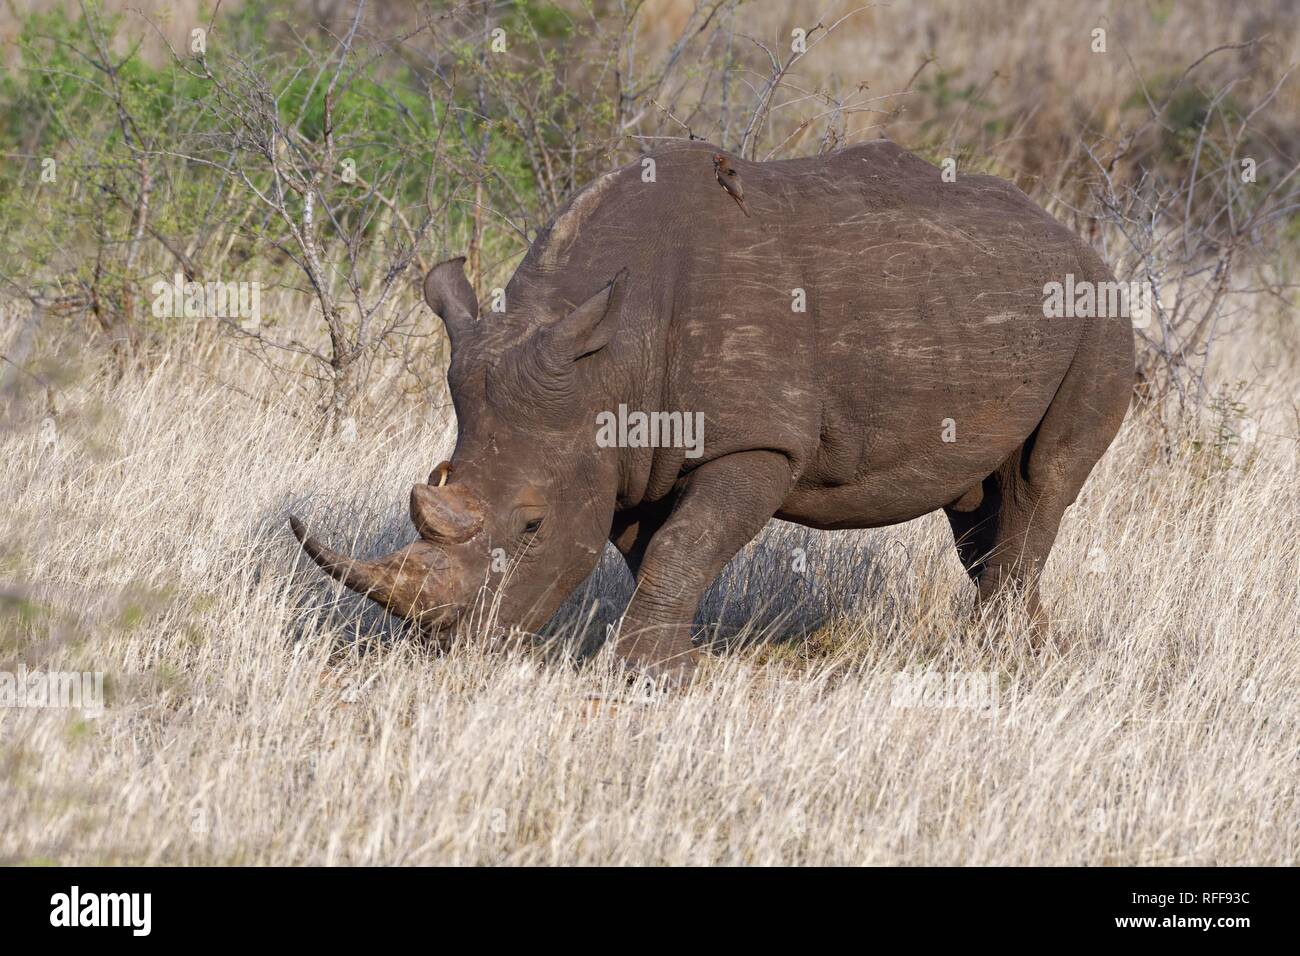 White rhinoceros (Ceratotherium simum), adult male, foraging, with two perched red-billed oxpeckers (Buphagus erythrorhynchus) Stock Photo